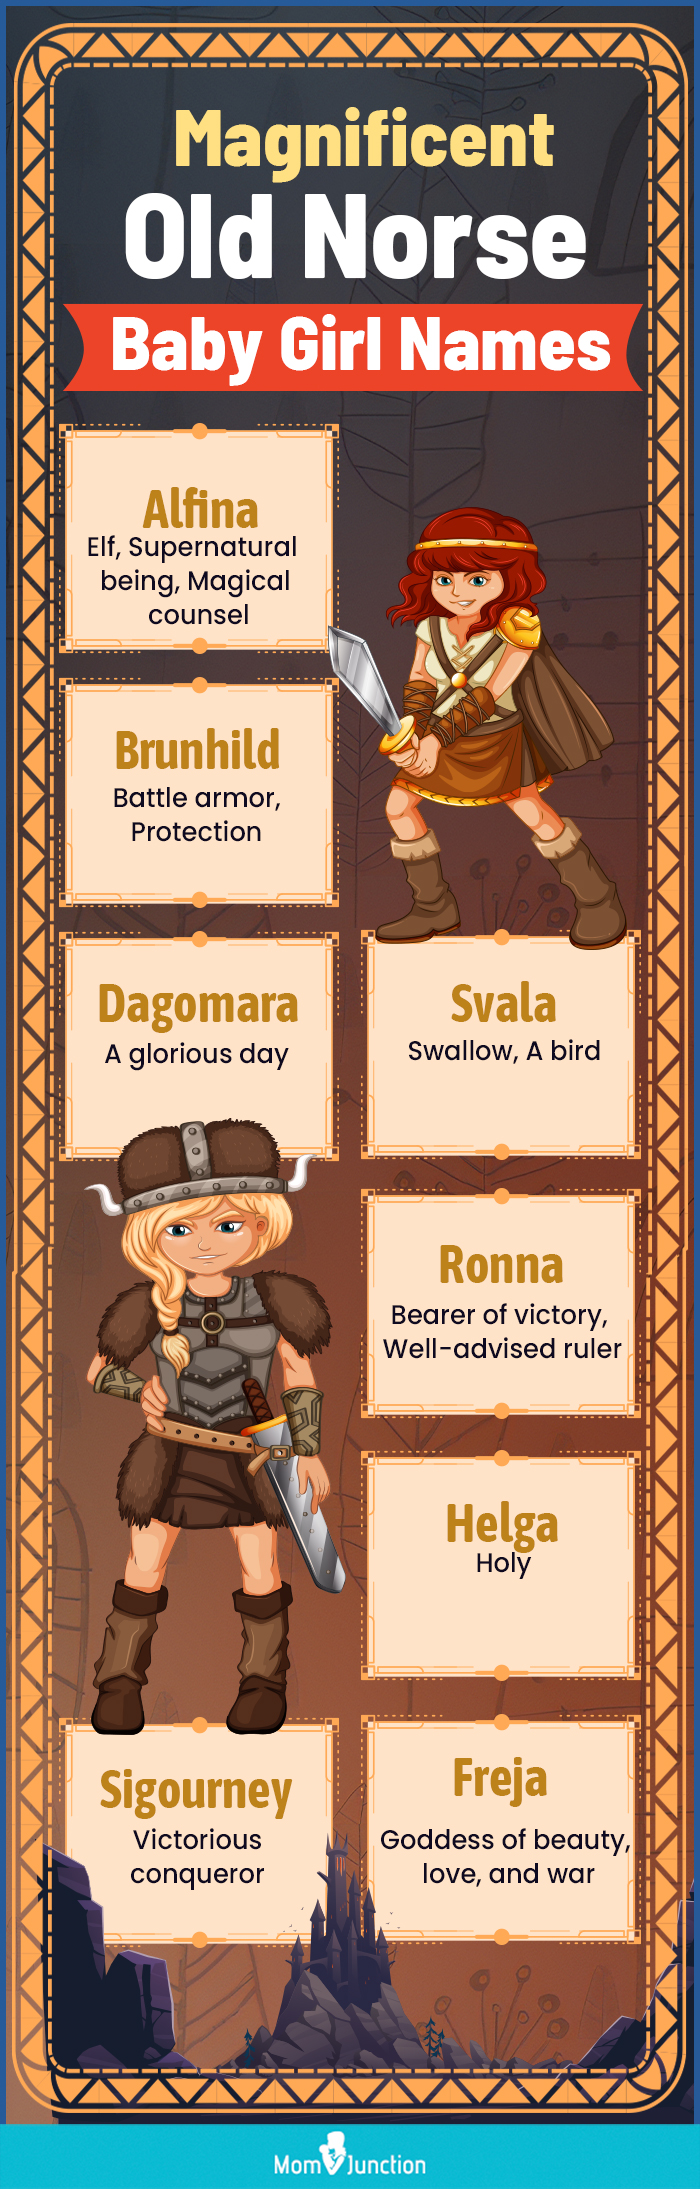 magnificent old norse baby girl names (infographic)